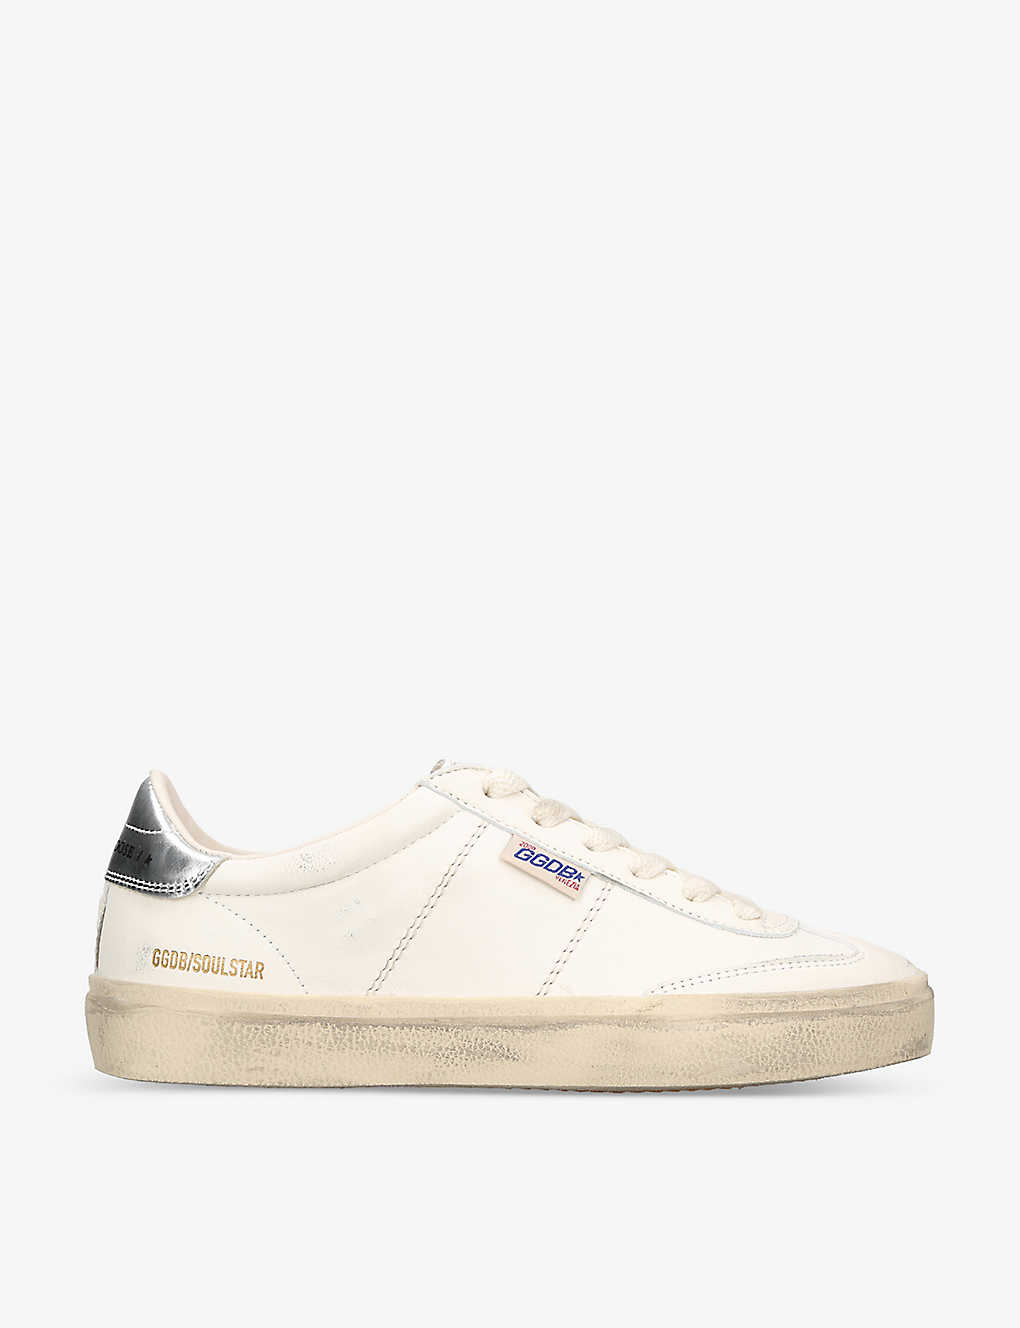 Shop Golden Goose Women's White/oth Women's Soulstar 80185 Distressed Leather Low-top Trainers